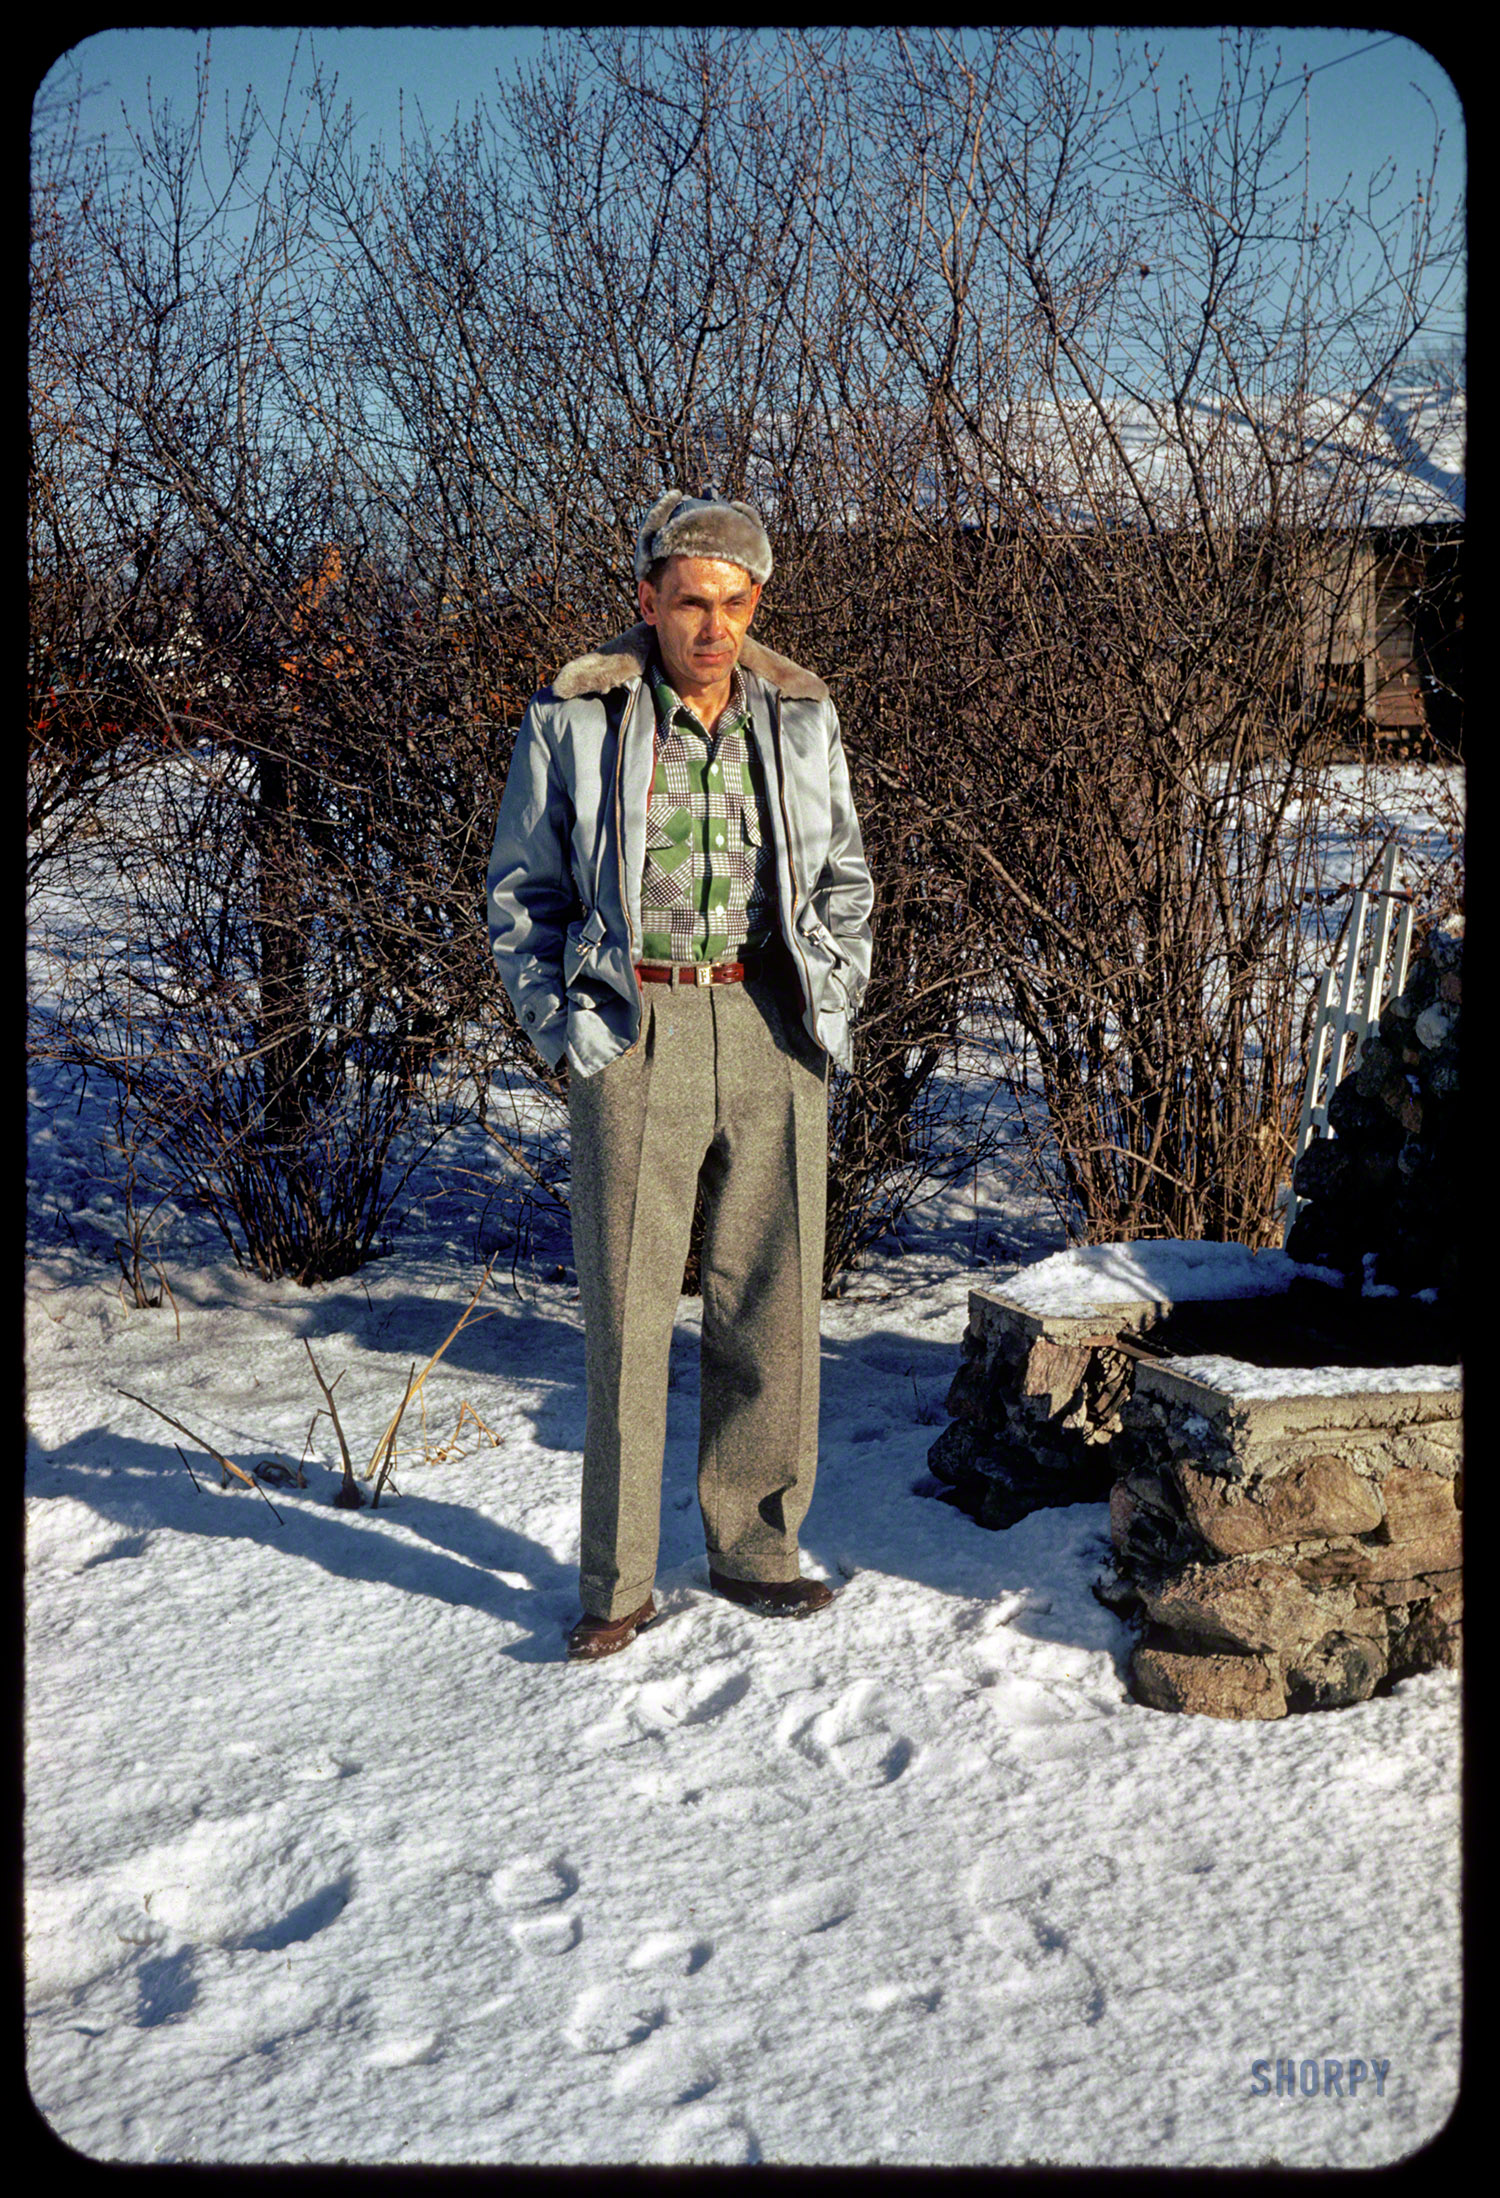 "Floyd at Folks -- Jan 20 1952." In this latest installment of Minnesota Kodachromes, Floyd shows that warmth and style need not be mutually exclusive. 35mm color slide by Hubert Tuttle. View full size.